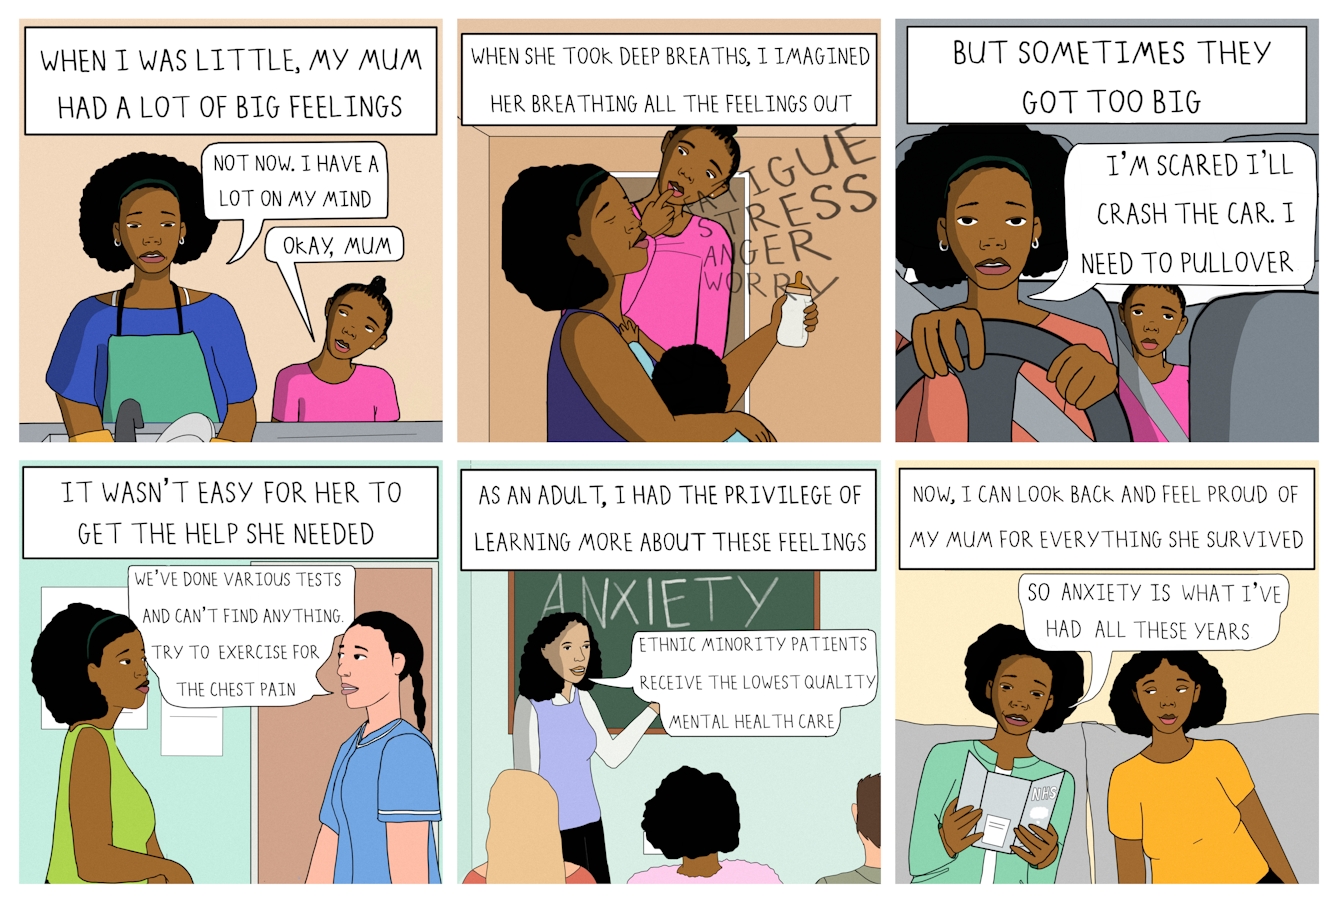 Colourful 6 panel comic, each panel is a square. 

Panel one opens with the narration, "When I was little, my mum had a lot of big feelings." Under the narration is a Black woman facing us, wearing a green apron, washing up at the sink. Next to her is her young daughter wearing a pink top looking up at her concerned. The mother says "Not now. I have a lot on my mind." The young girl replies "Okay, Mum."

In panel two the narration continues, "When she took deep breaths, I imagined her breathing all the feelings out." The mother holds a baby in one arm and a feeding bottle in the other hand. Her eyes are closed and her head tilted back slightly. She's seems to be breathing out the words "Fatigue, stress, anger, worry." Behind her the young daughter rests her finger thoughtfully on her lip as she looks at her mum's face questioningly.

In panel three the narration continues, "But sometimes they get too big." The mother is now facing us, driving a car, hands on the steering wheel and seatbelt across her chest. From the back seat the young girl looks forward anxiously. The mother says, "I'm scared I'll crash the car. I need to pull over."

In panel four the narration continues, "It wasn't easy for her to get the help she needed." The scene shows the mother in a medical setting facing a healthcare professional who is explaining "We've done various tests and can't find anything. Try to exercise for the chest pain."

In panel five the narration continues, "As an adult, I had the privilege of learning more about these feelings." The scene shows an adult classroom setting with the backs of heads and a teachers standing at a green chalkboard which has the word 'Anxiety' written in all capitals on it. The teacher is saying "Ethnic minority patients receive the lowest quality mental health care."

In panel six the narration concludes, "Now, I can look back and feel proud of my mum for everything she survived." The scene shows the mother and her now grownup daughter sitting together on the sofa. The mother is reading a leaflet from the NHS and says "So anxiety is what I've had all these years." Her daughter looks across at her lovingly.